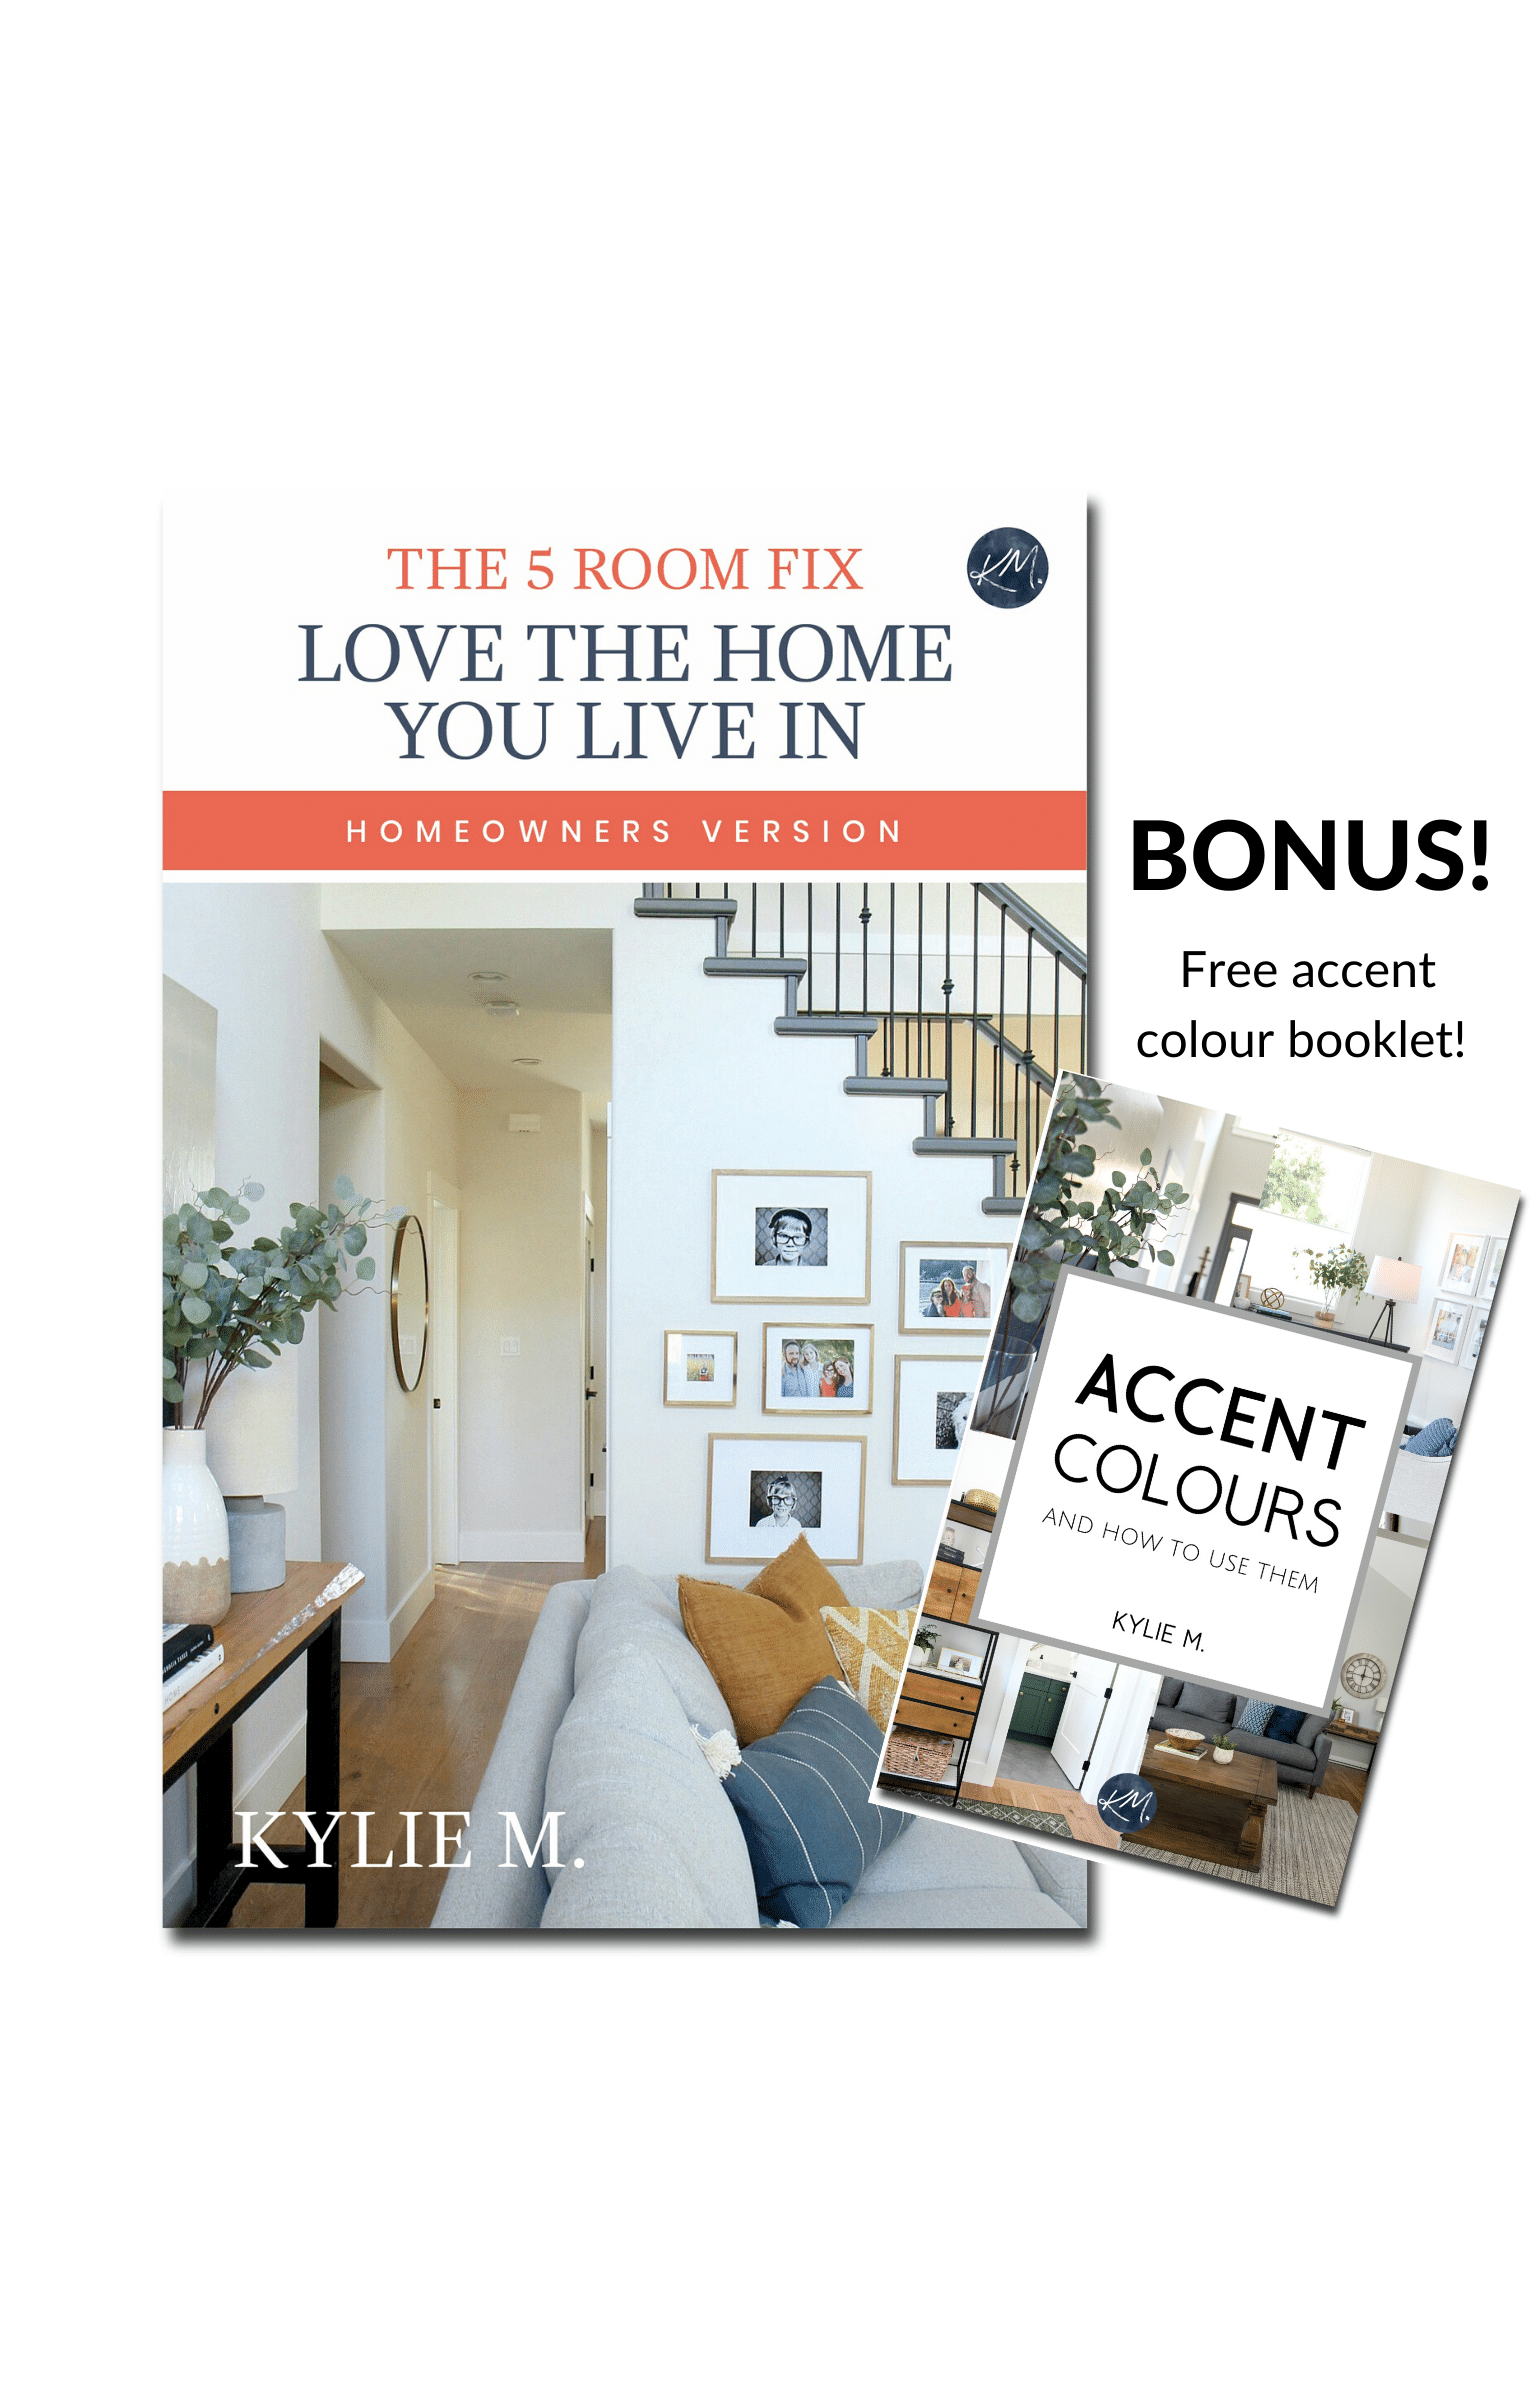 Ebook, decorating, and Diy home decor ideas to love the home you have. 5 Room Fix, Kylie M Interiors Edesign, virtual, online paint colour consultant and blogger